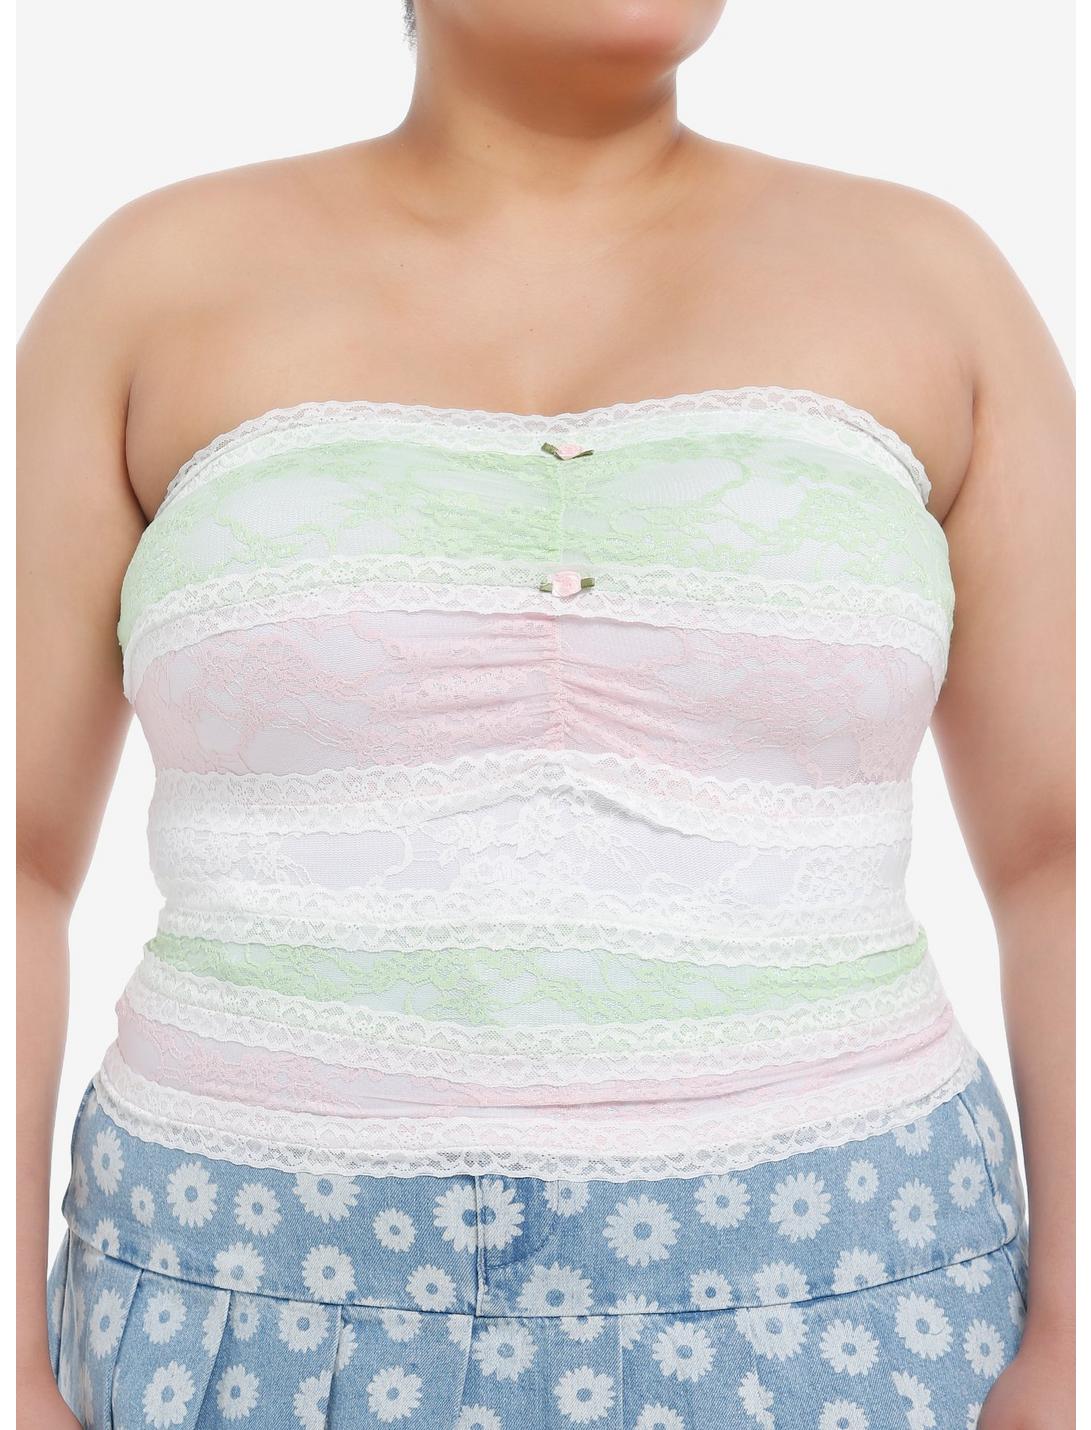 Sweet Society Stripe Rosette Lace Girls Tube Top Plus Size, PINK, hi-res